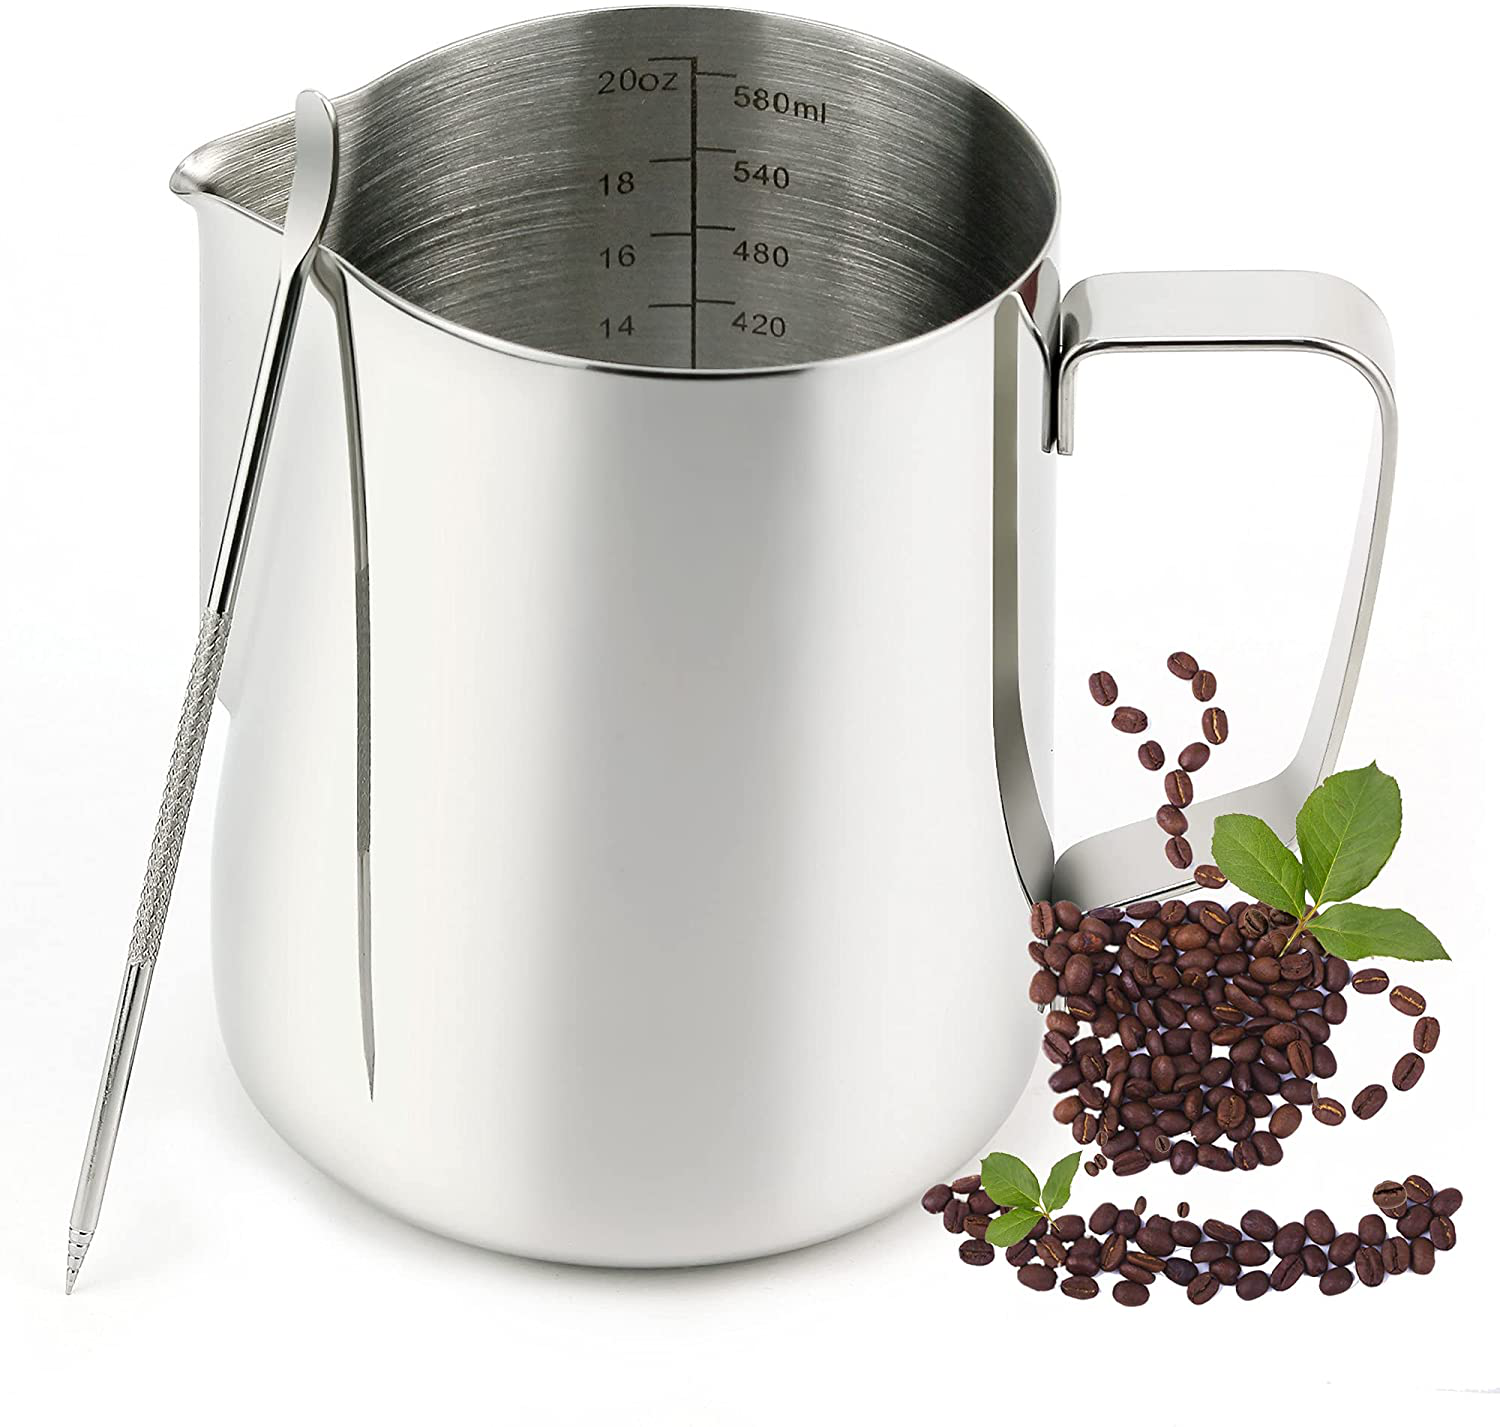 Miscedence Milk Frothing pitcher,12oz Cappuccino milk frother cup